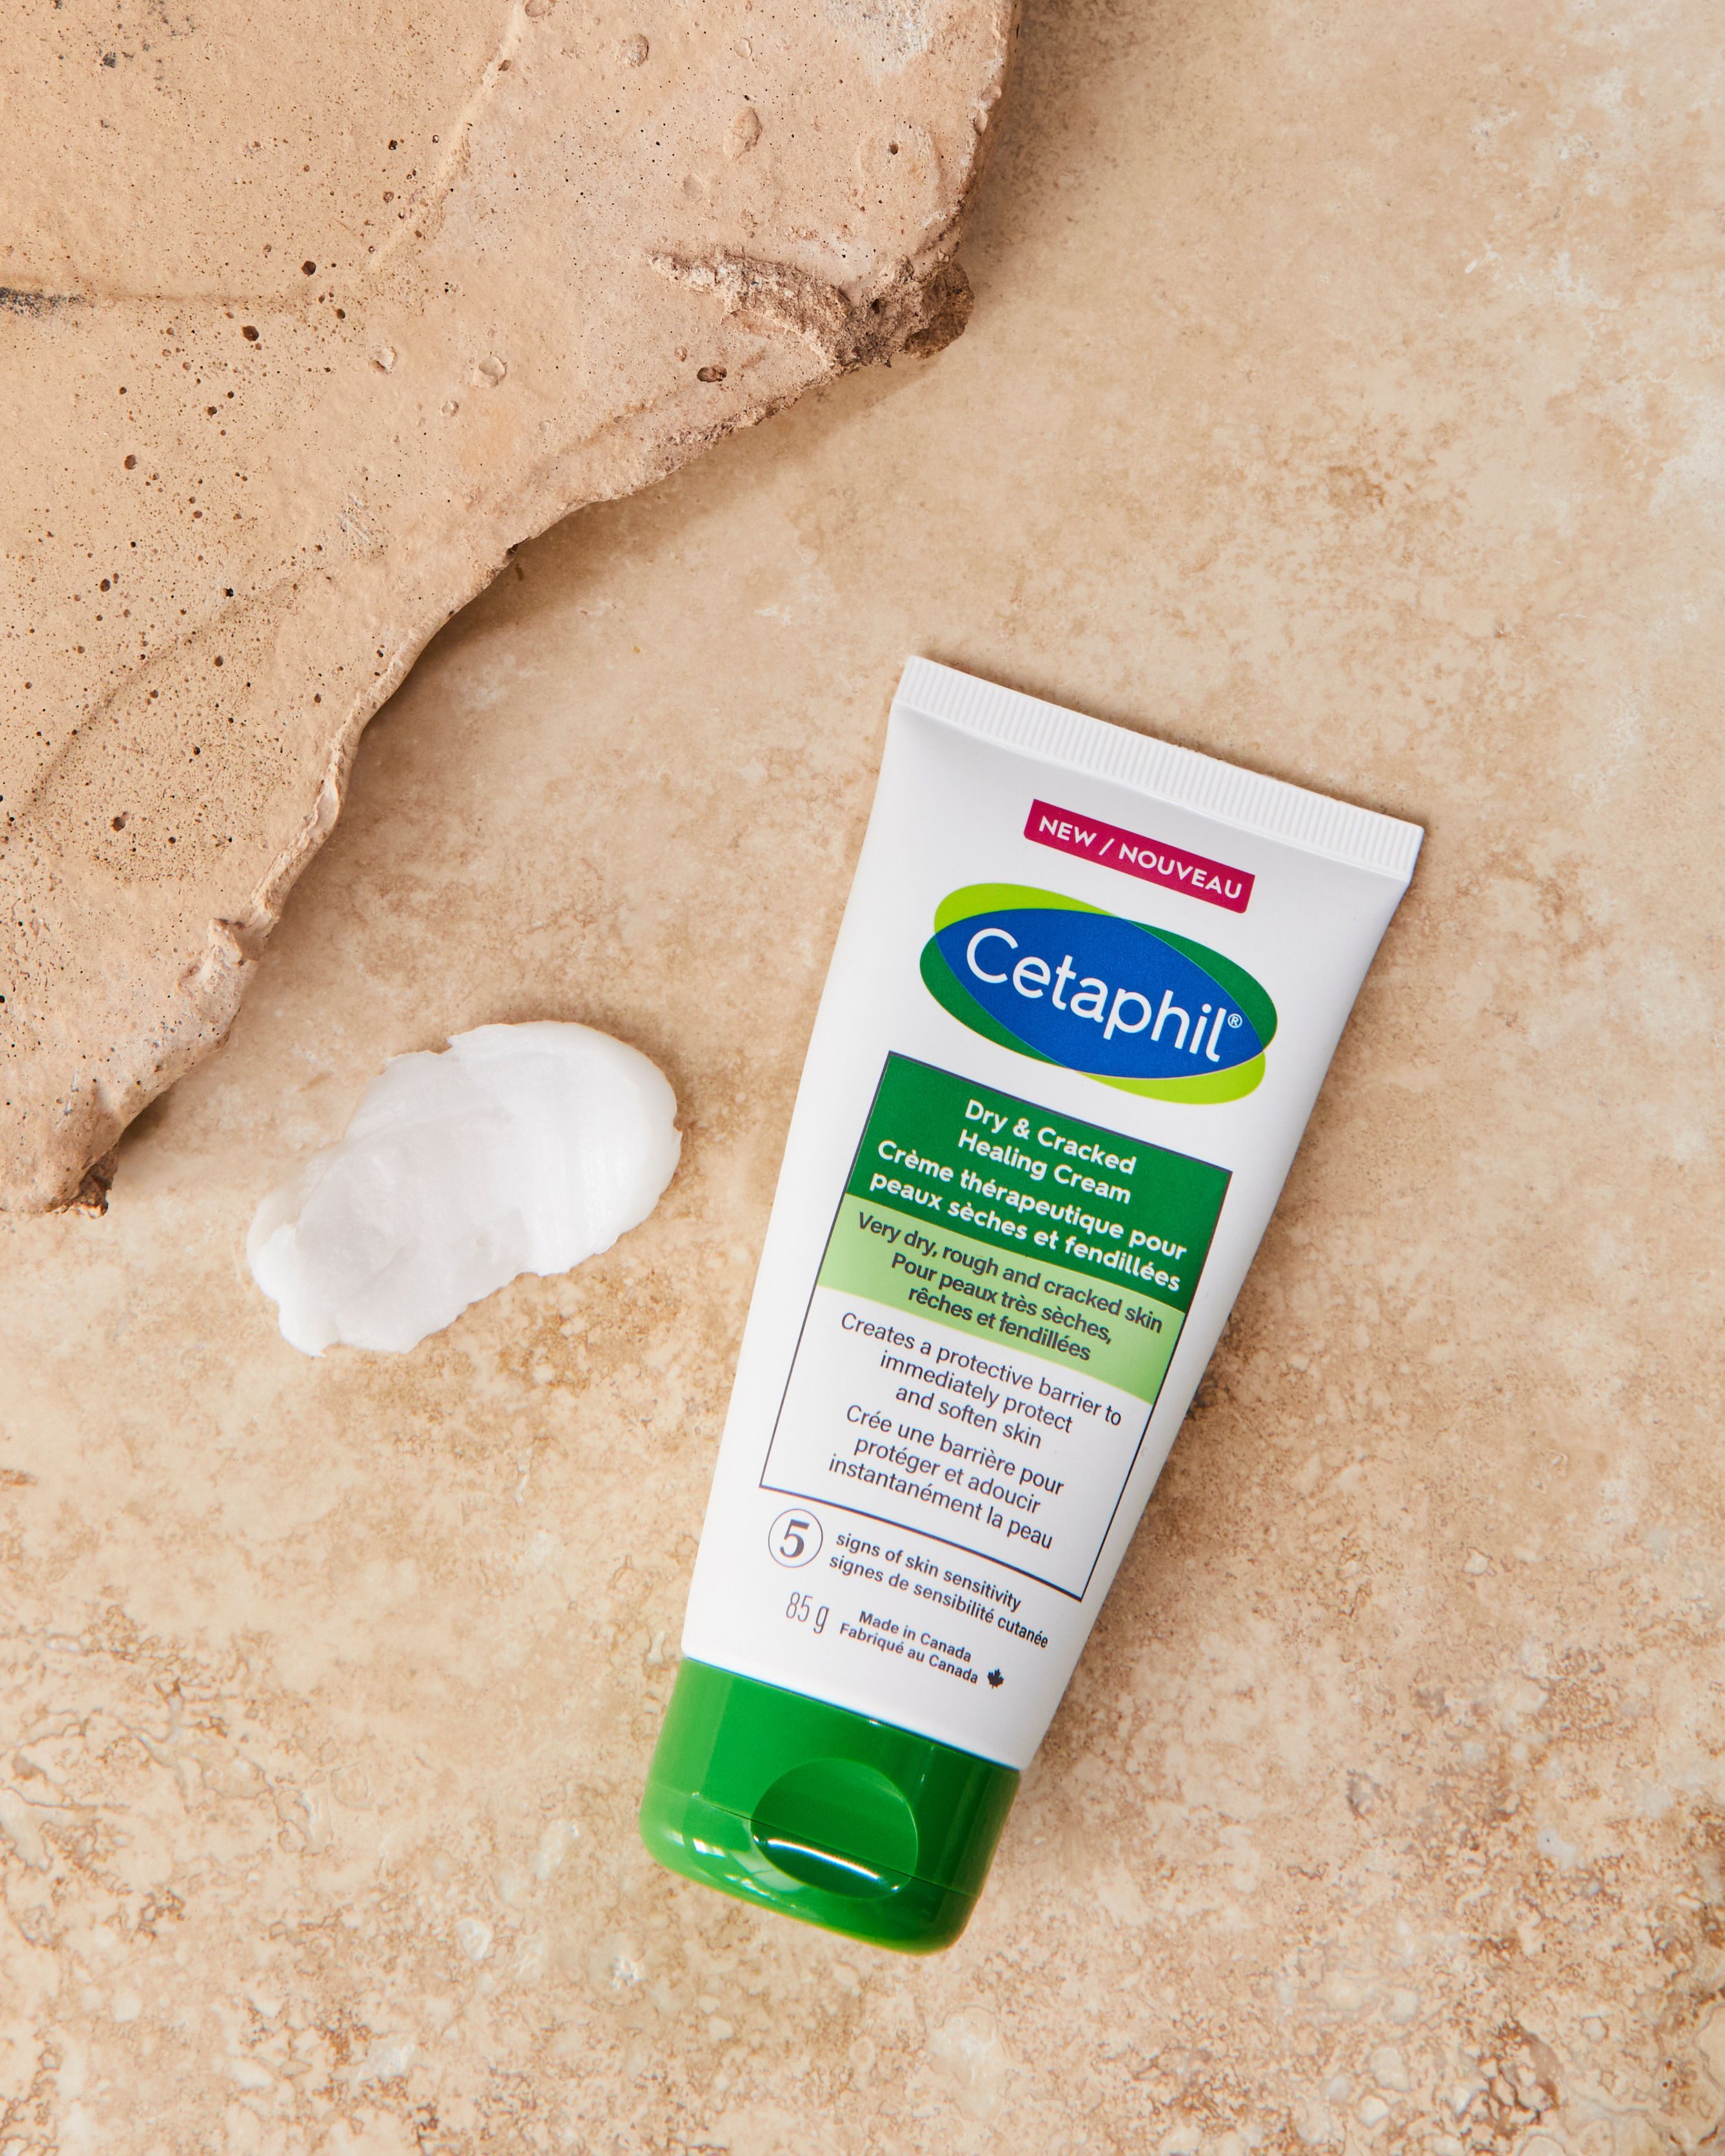  photographed for  Cetaphil Canada , styled by  Hina Mistry  